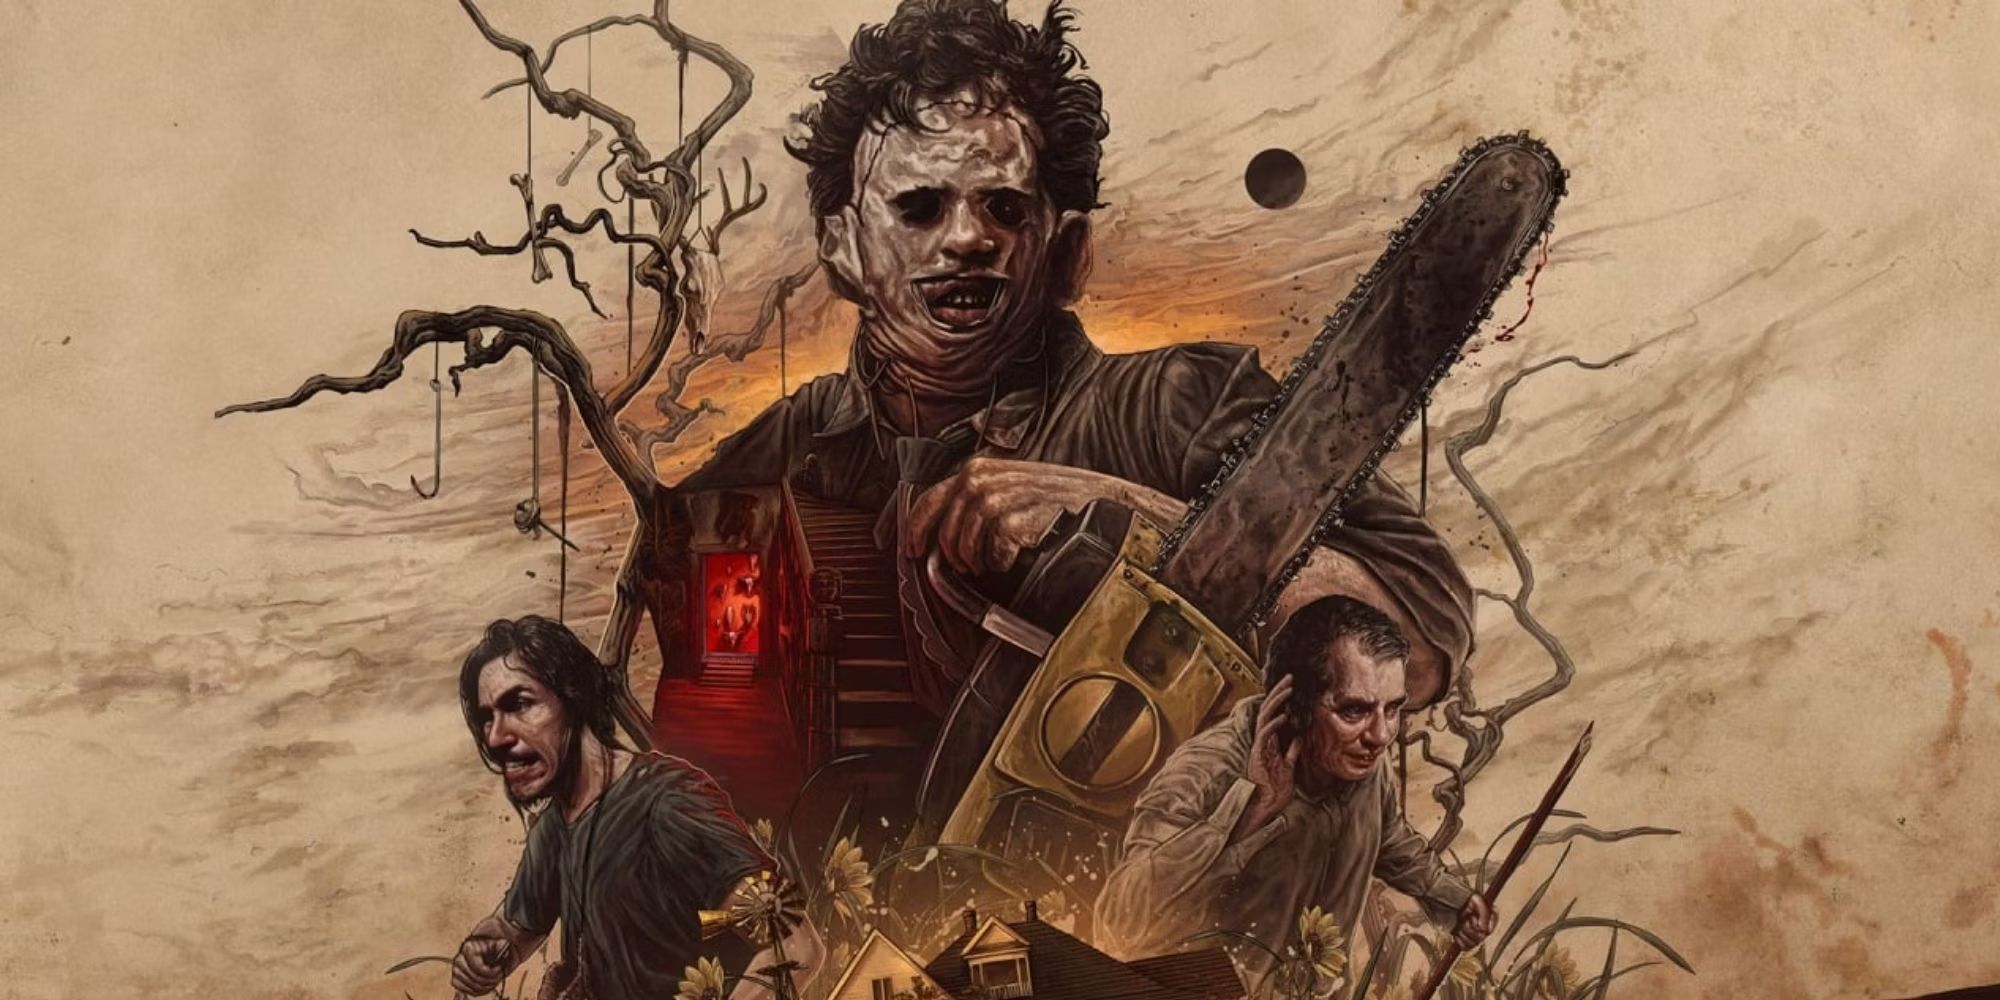 Texas Chainsaw Massacre Release Date Revealed